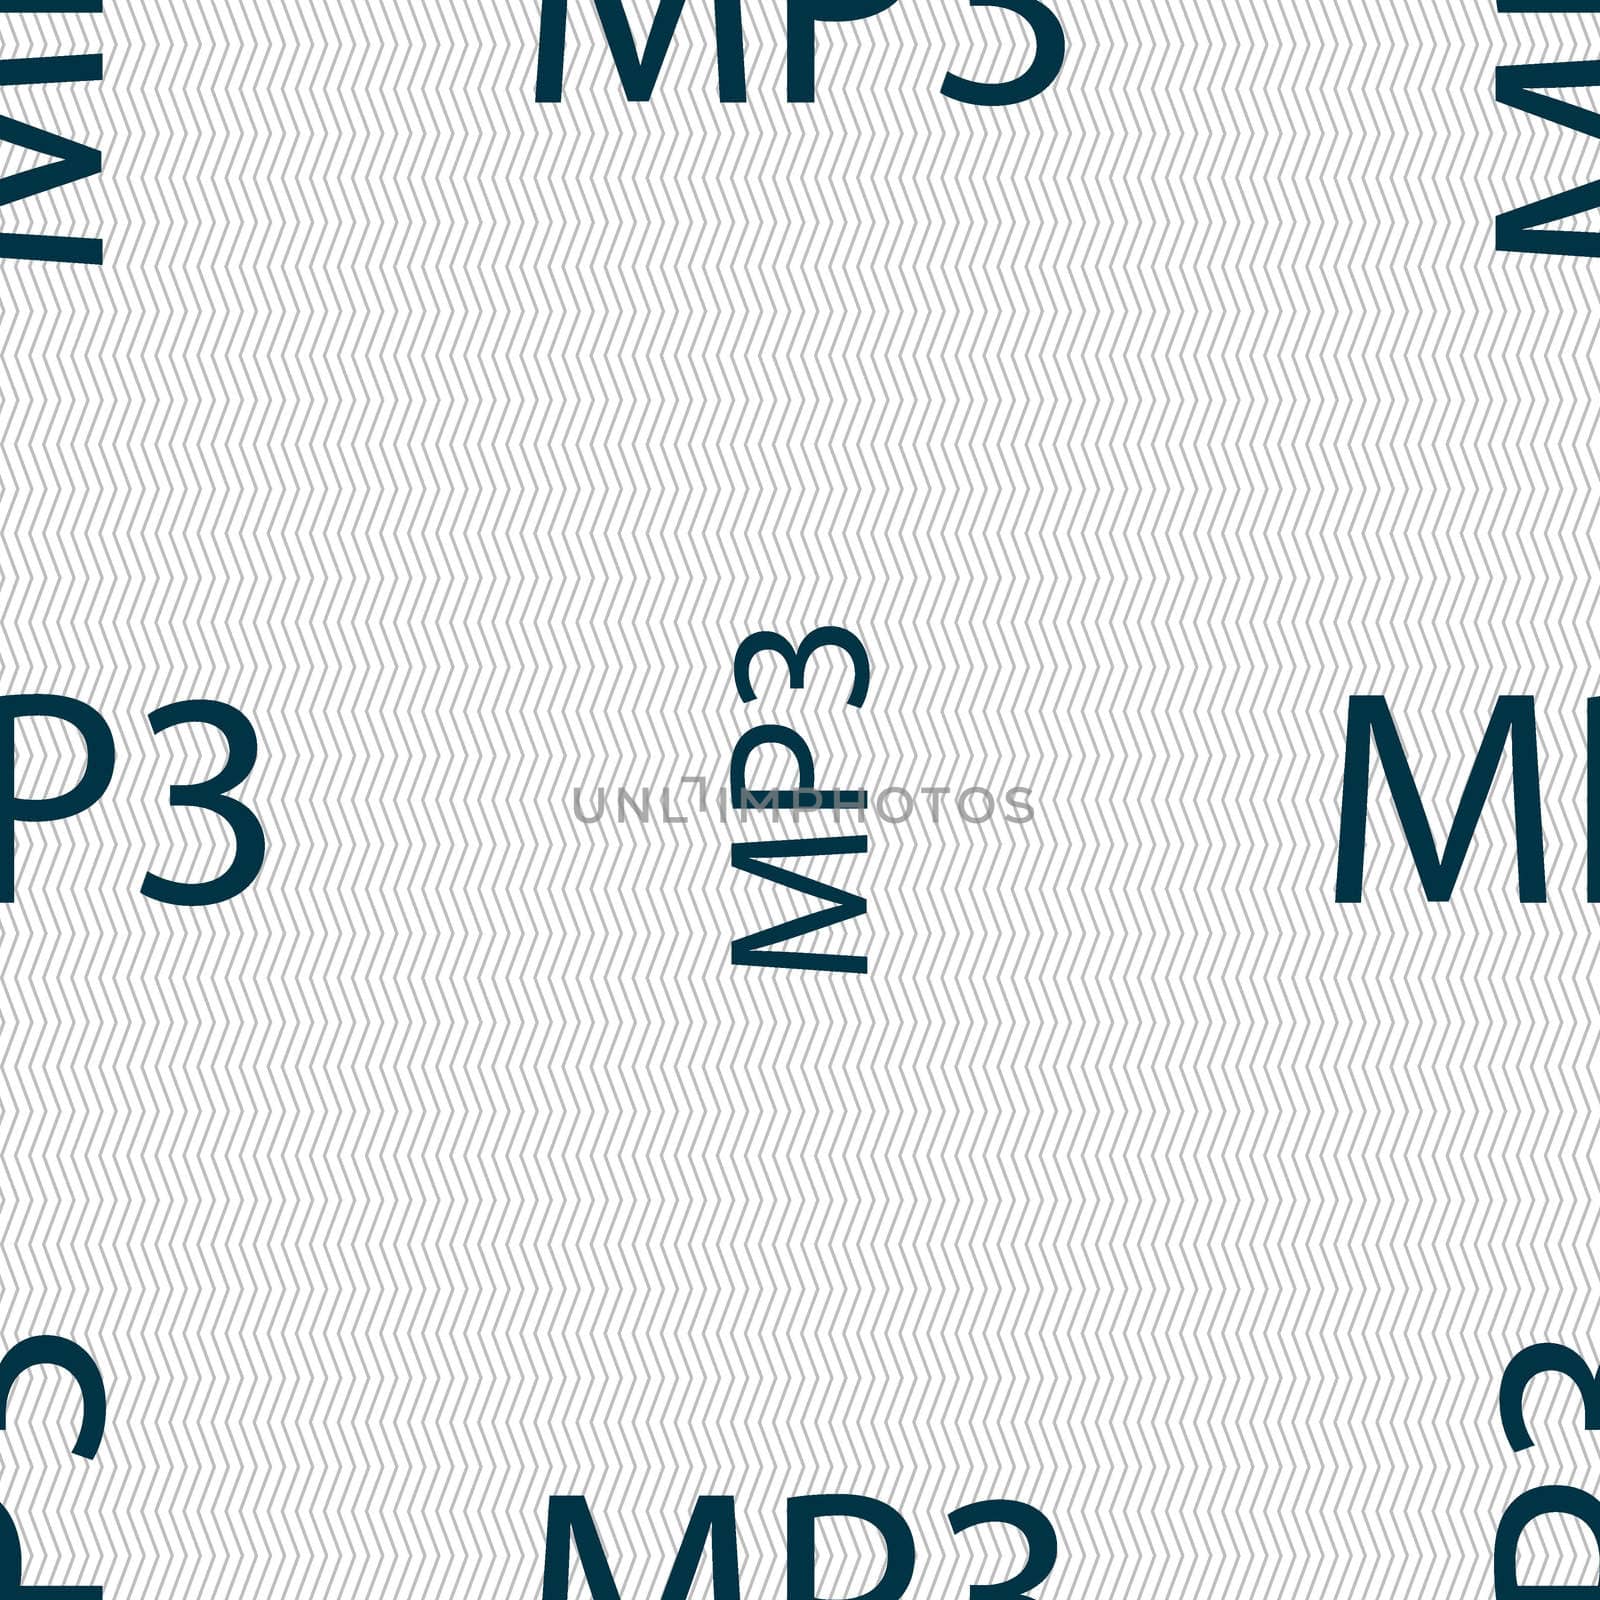 Mp3 music format sign icon. Musical symbol. Seamless abstract background with geometric shapes.  by serhii_lohvyniuk